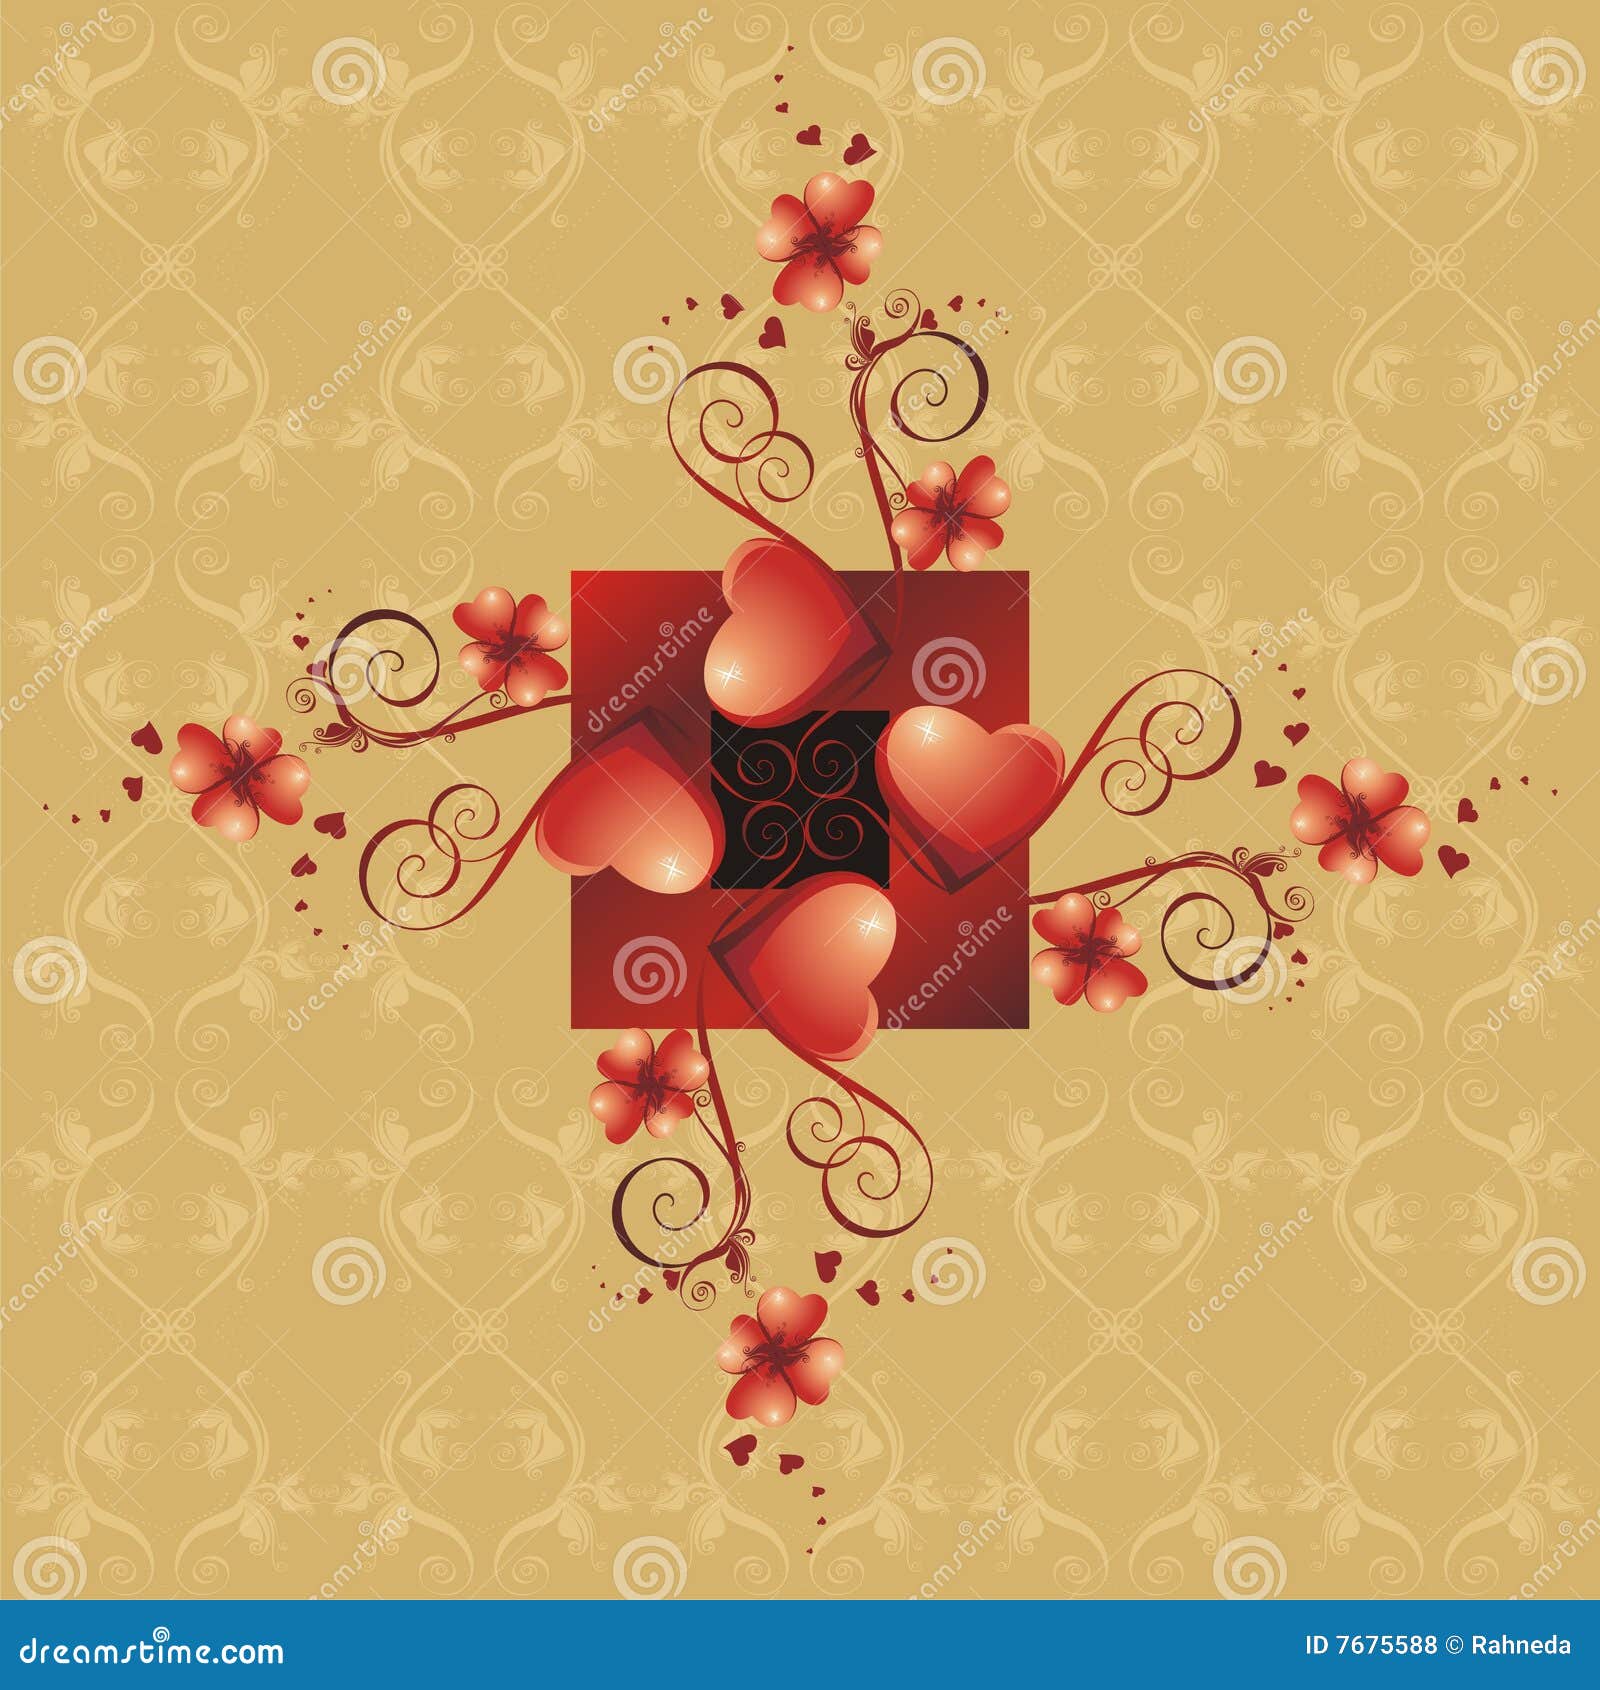 Valentines Day background with Hearts and flowers, vector illustration ...